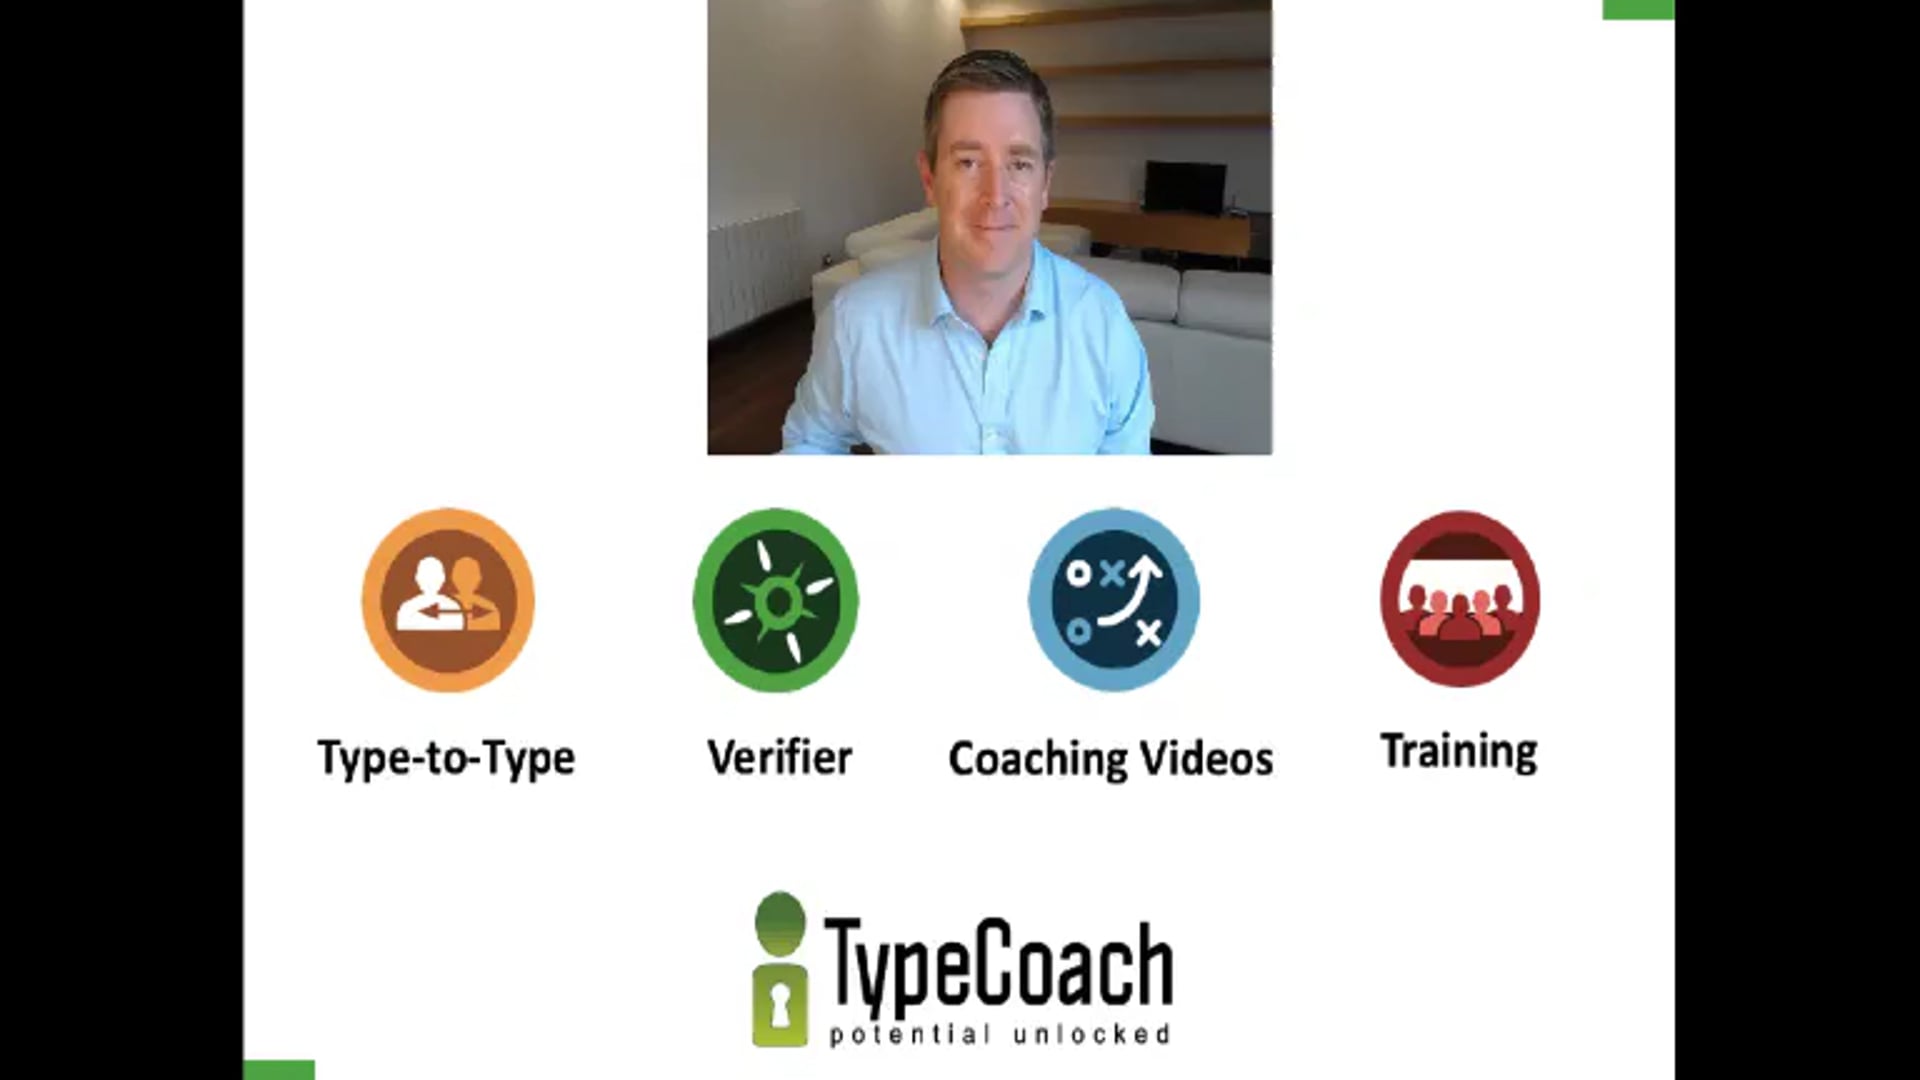 Why TypeCoach?